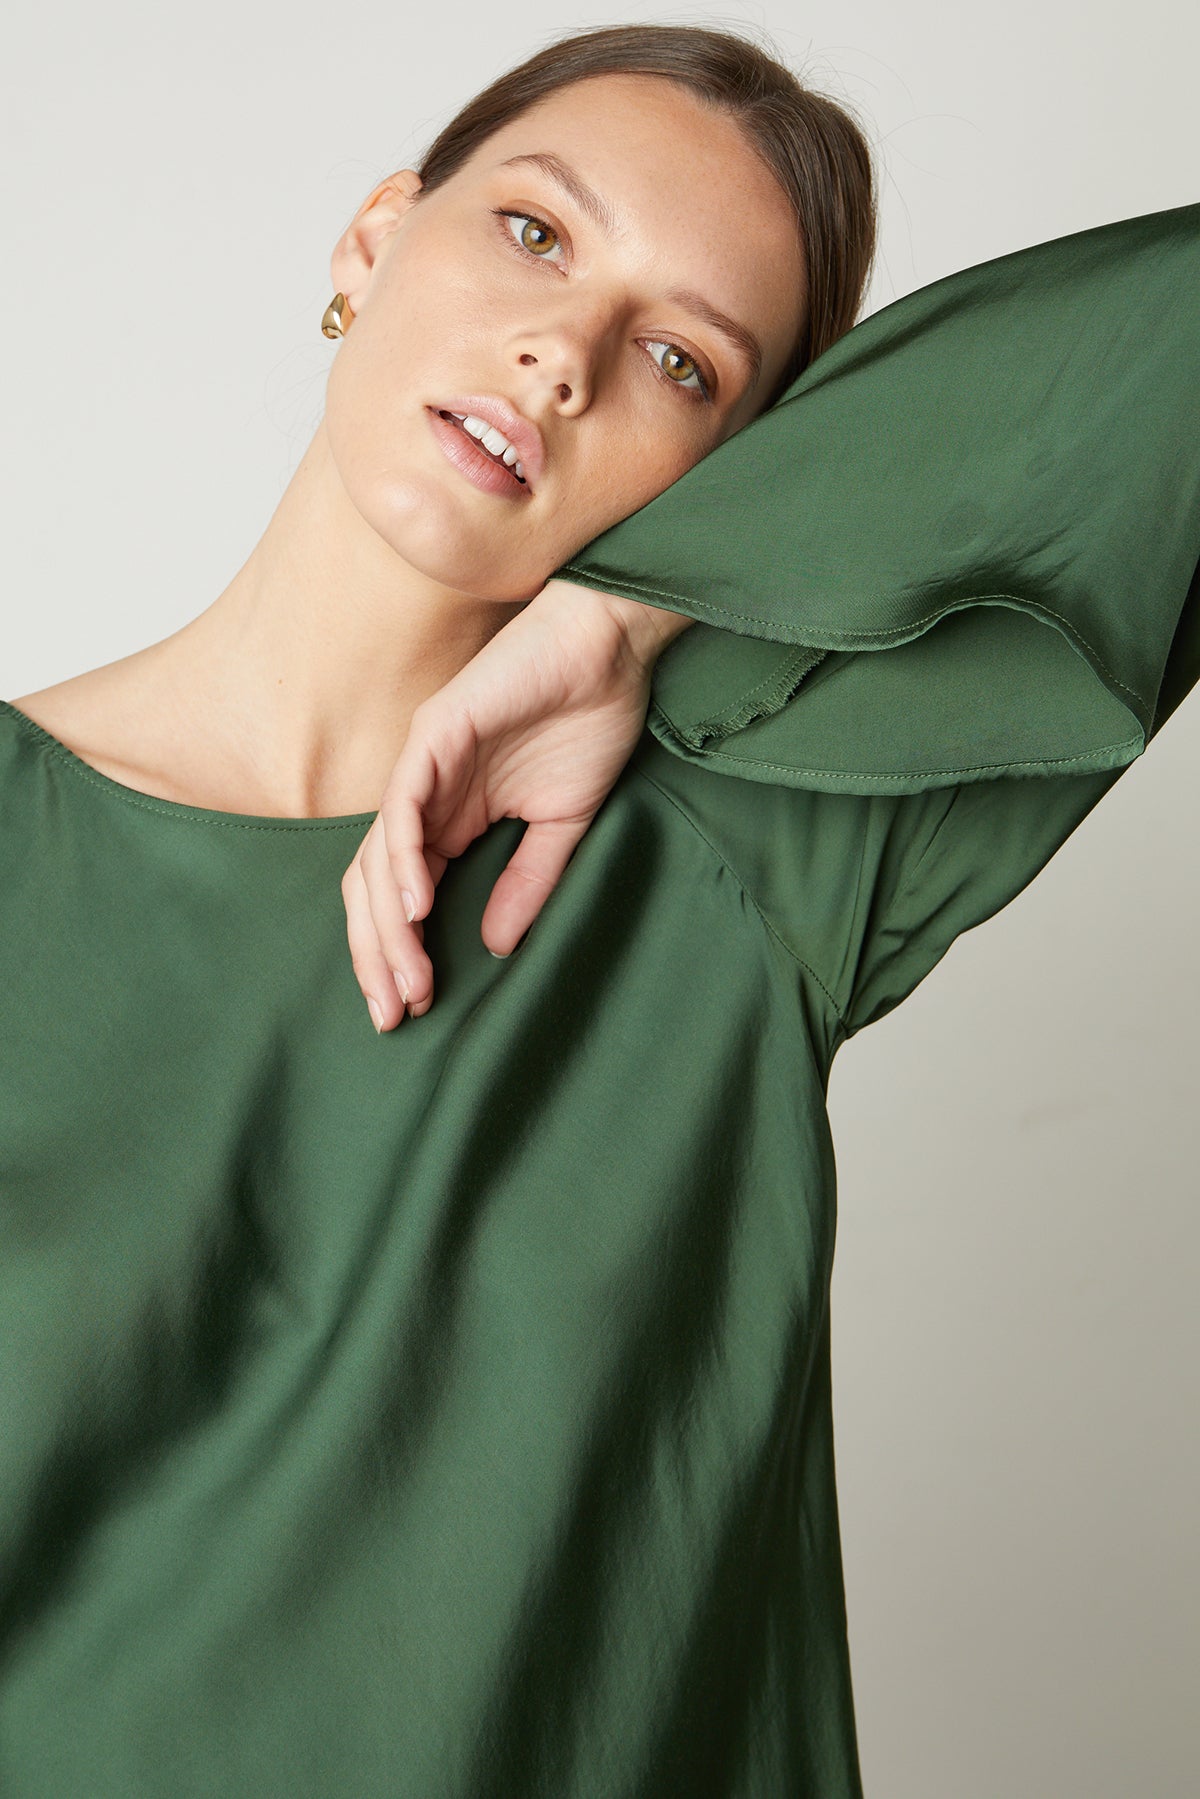   Catherine Satin Midi Dress in fern green close up front & sleeve 